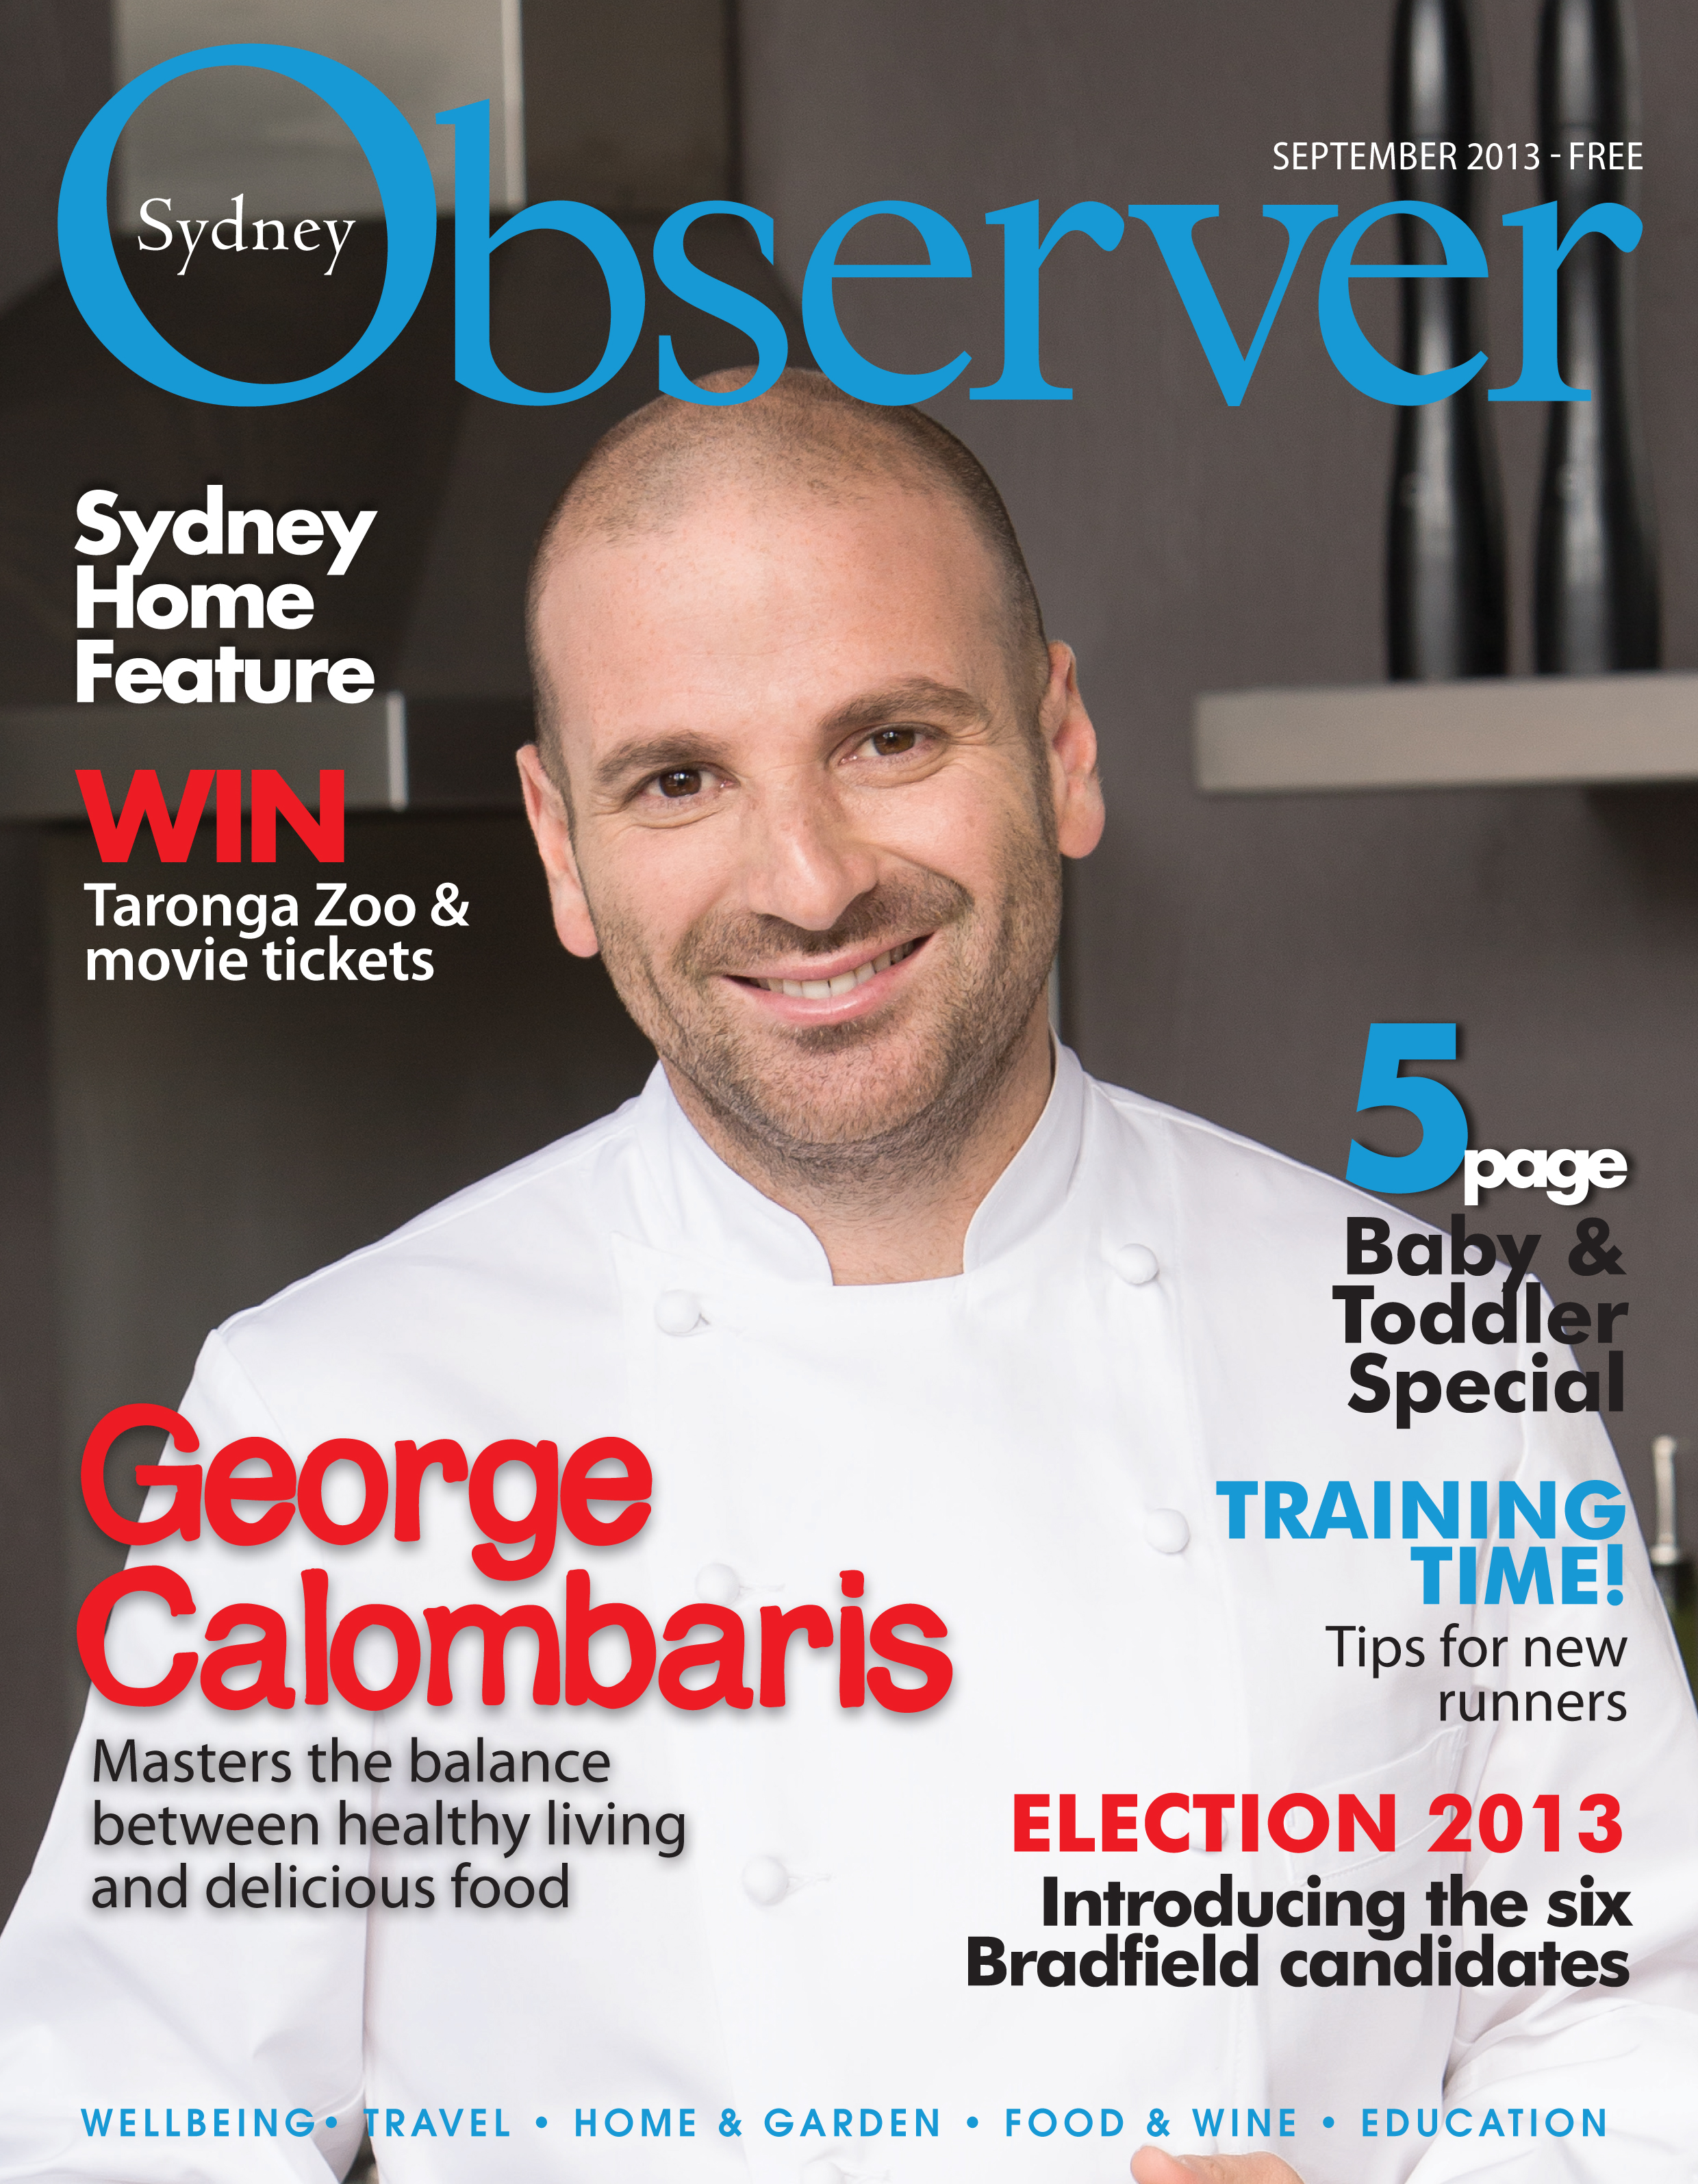 Sydney Observer September 2013 cover issue with George Calombaris.